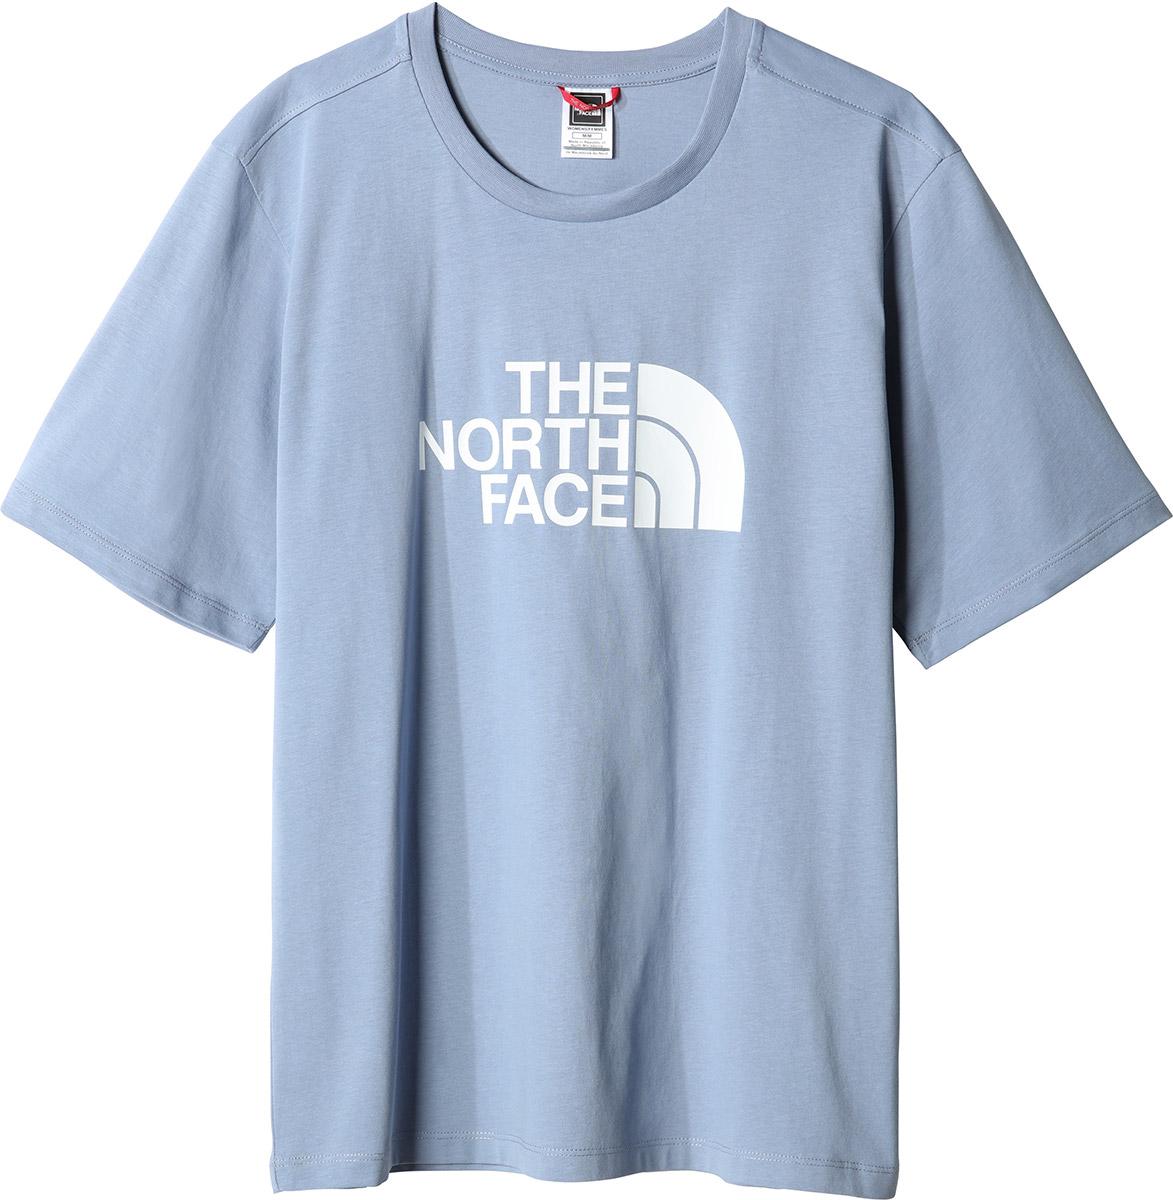 The North Face Womens Relaxed Easy Tee - Folk Blue